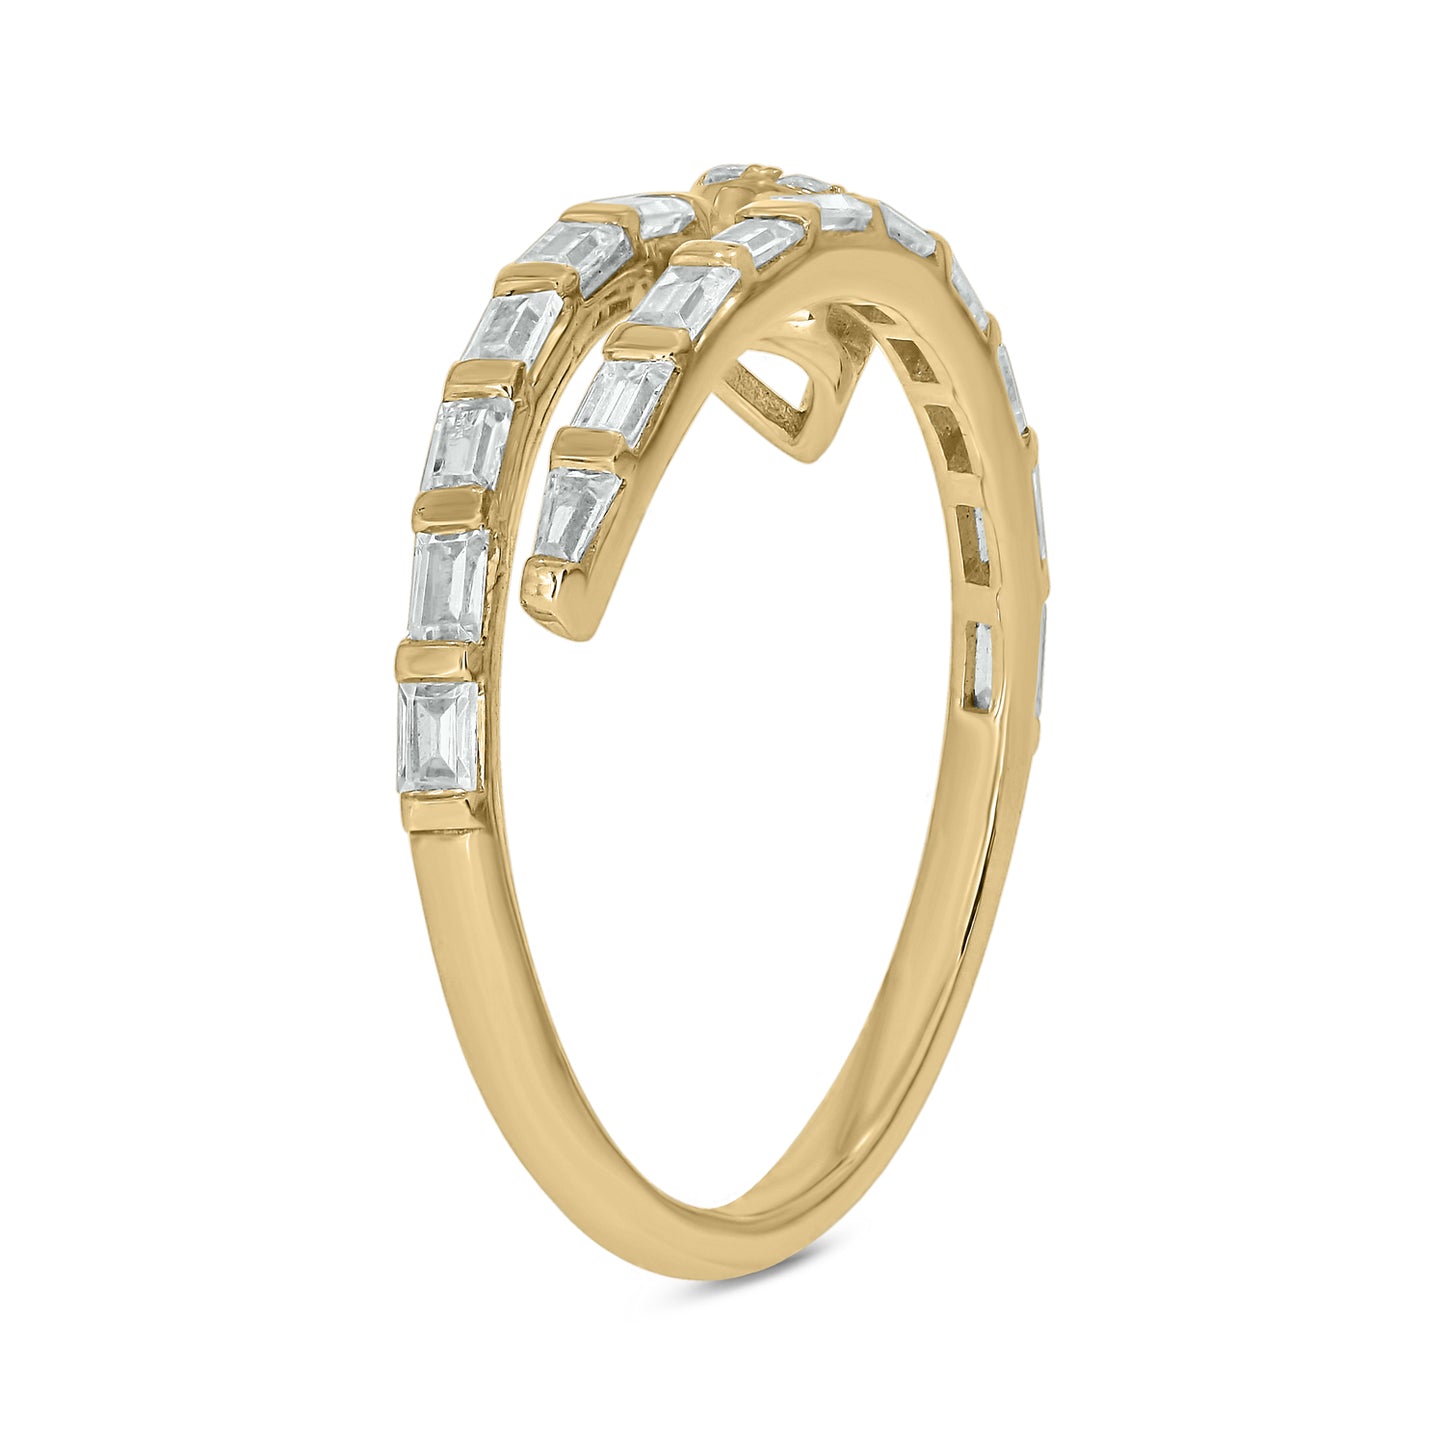 14KT Gold Stylish Open Ring, 5/8cttw Round & Baguette Diamonds